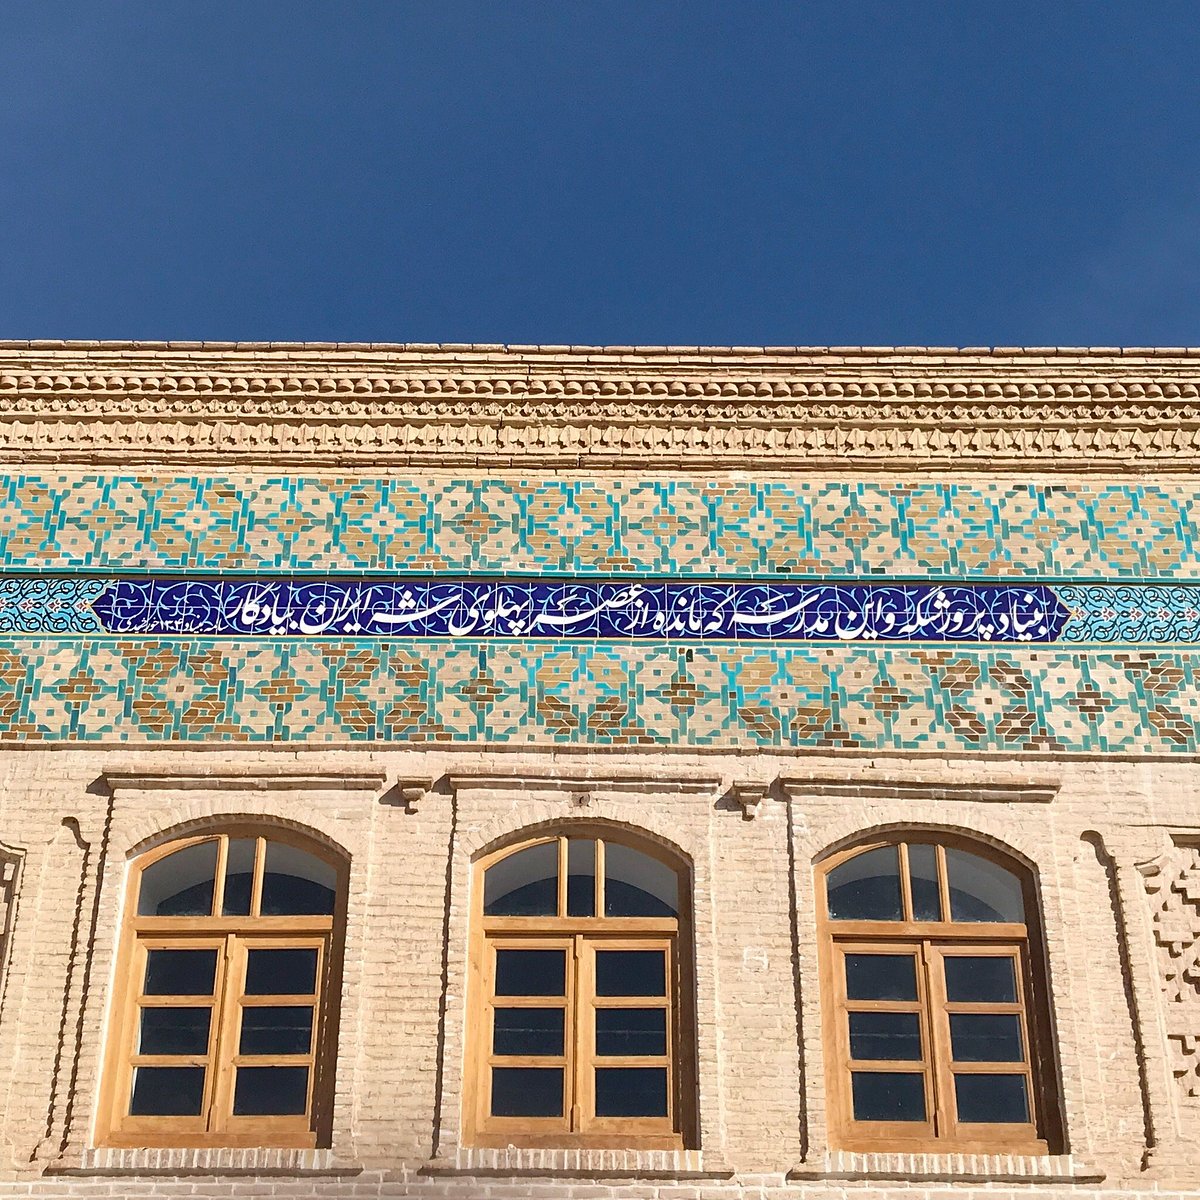 Zoroastrians History and Culture Museum, Yazd